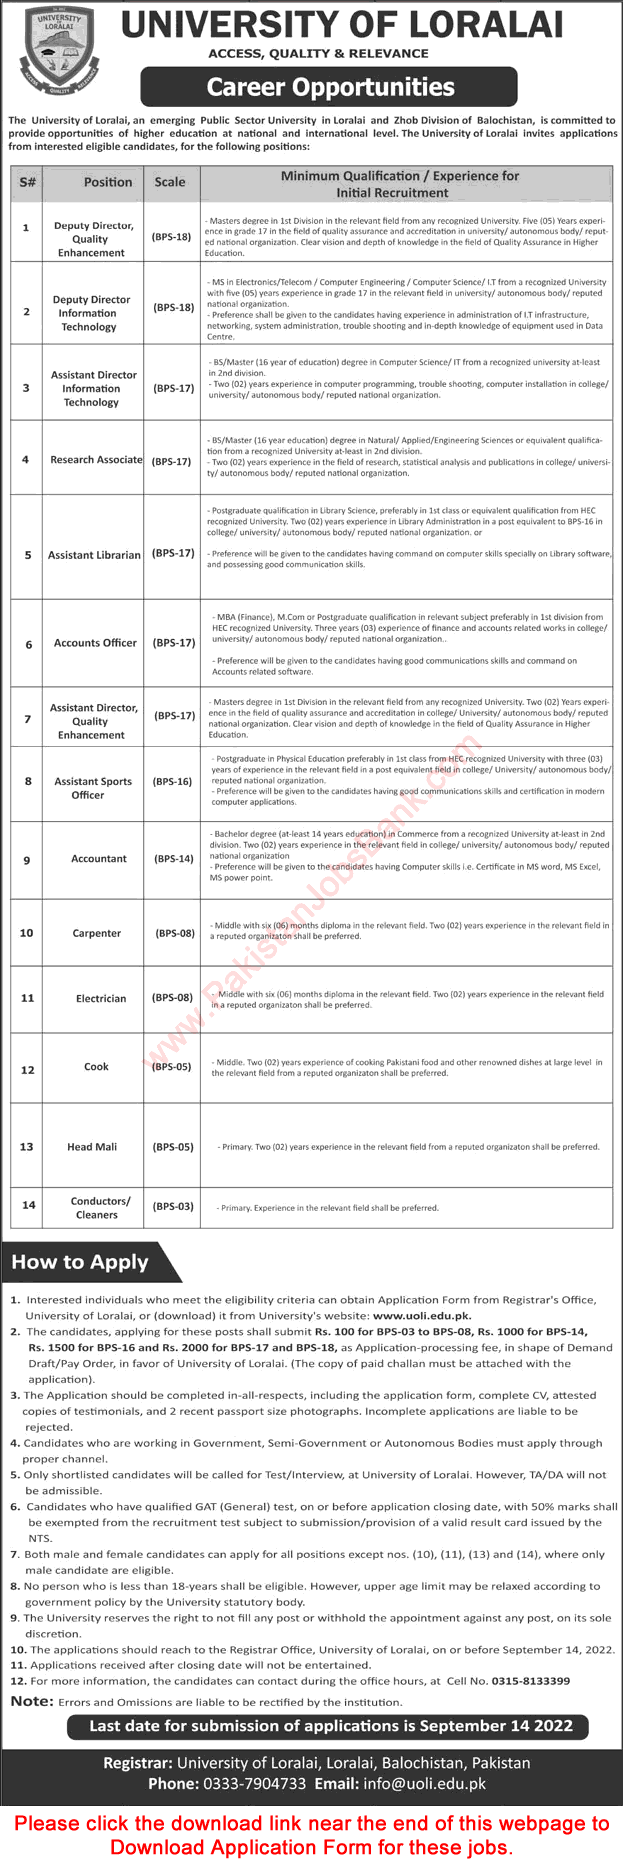 University of Loralai Jobs August 2022 Application Form Deputy Assistant Directors & Others Latest